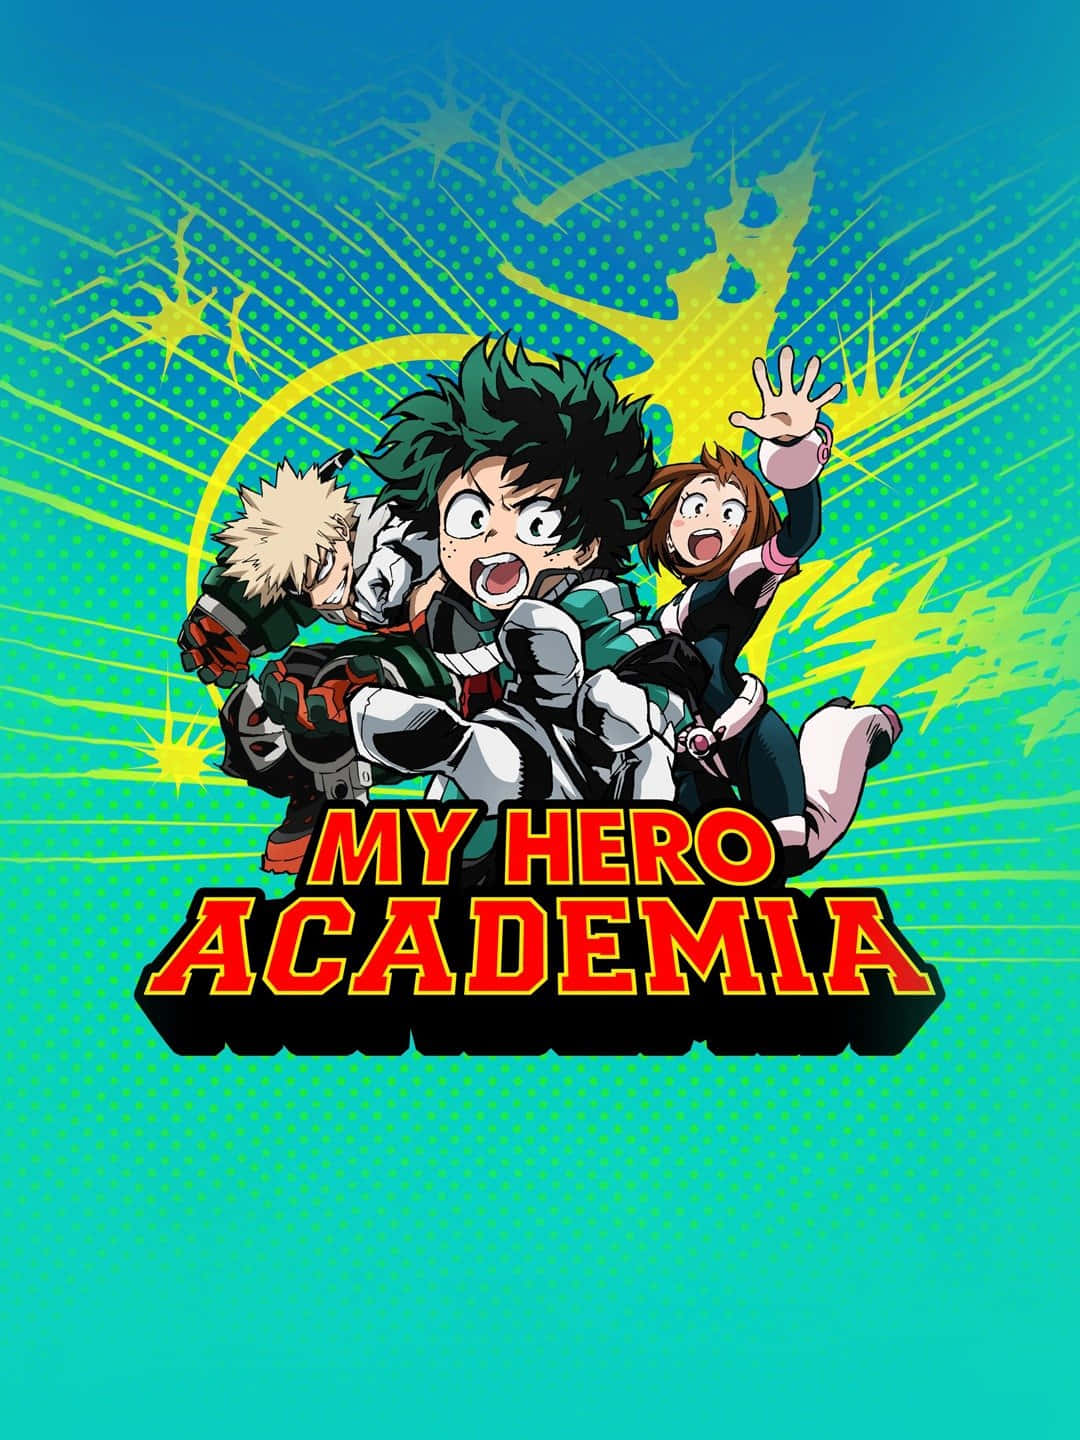 A look at the iconic class 1-A characters from My Hero Academia